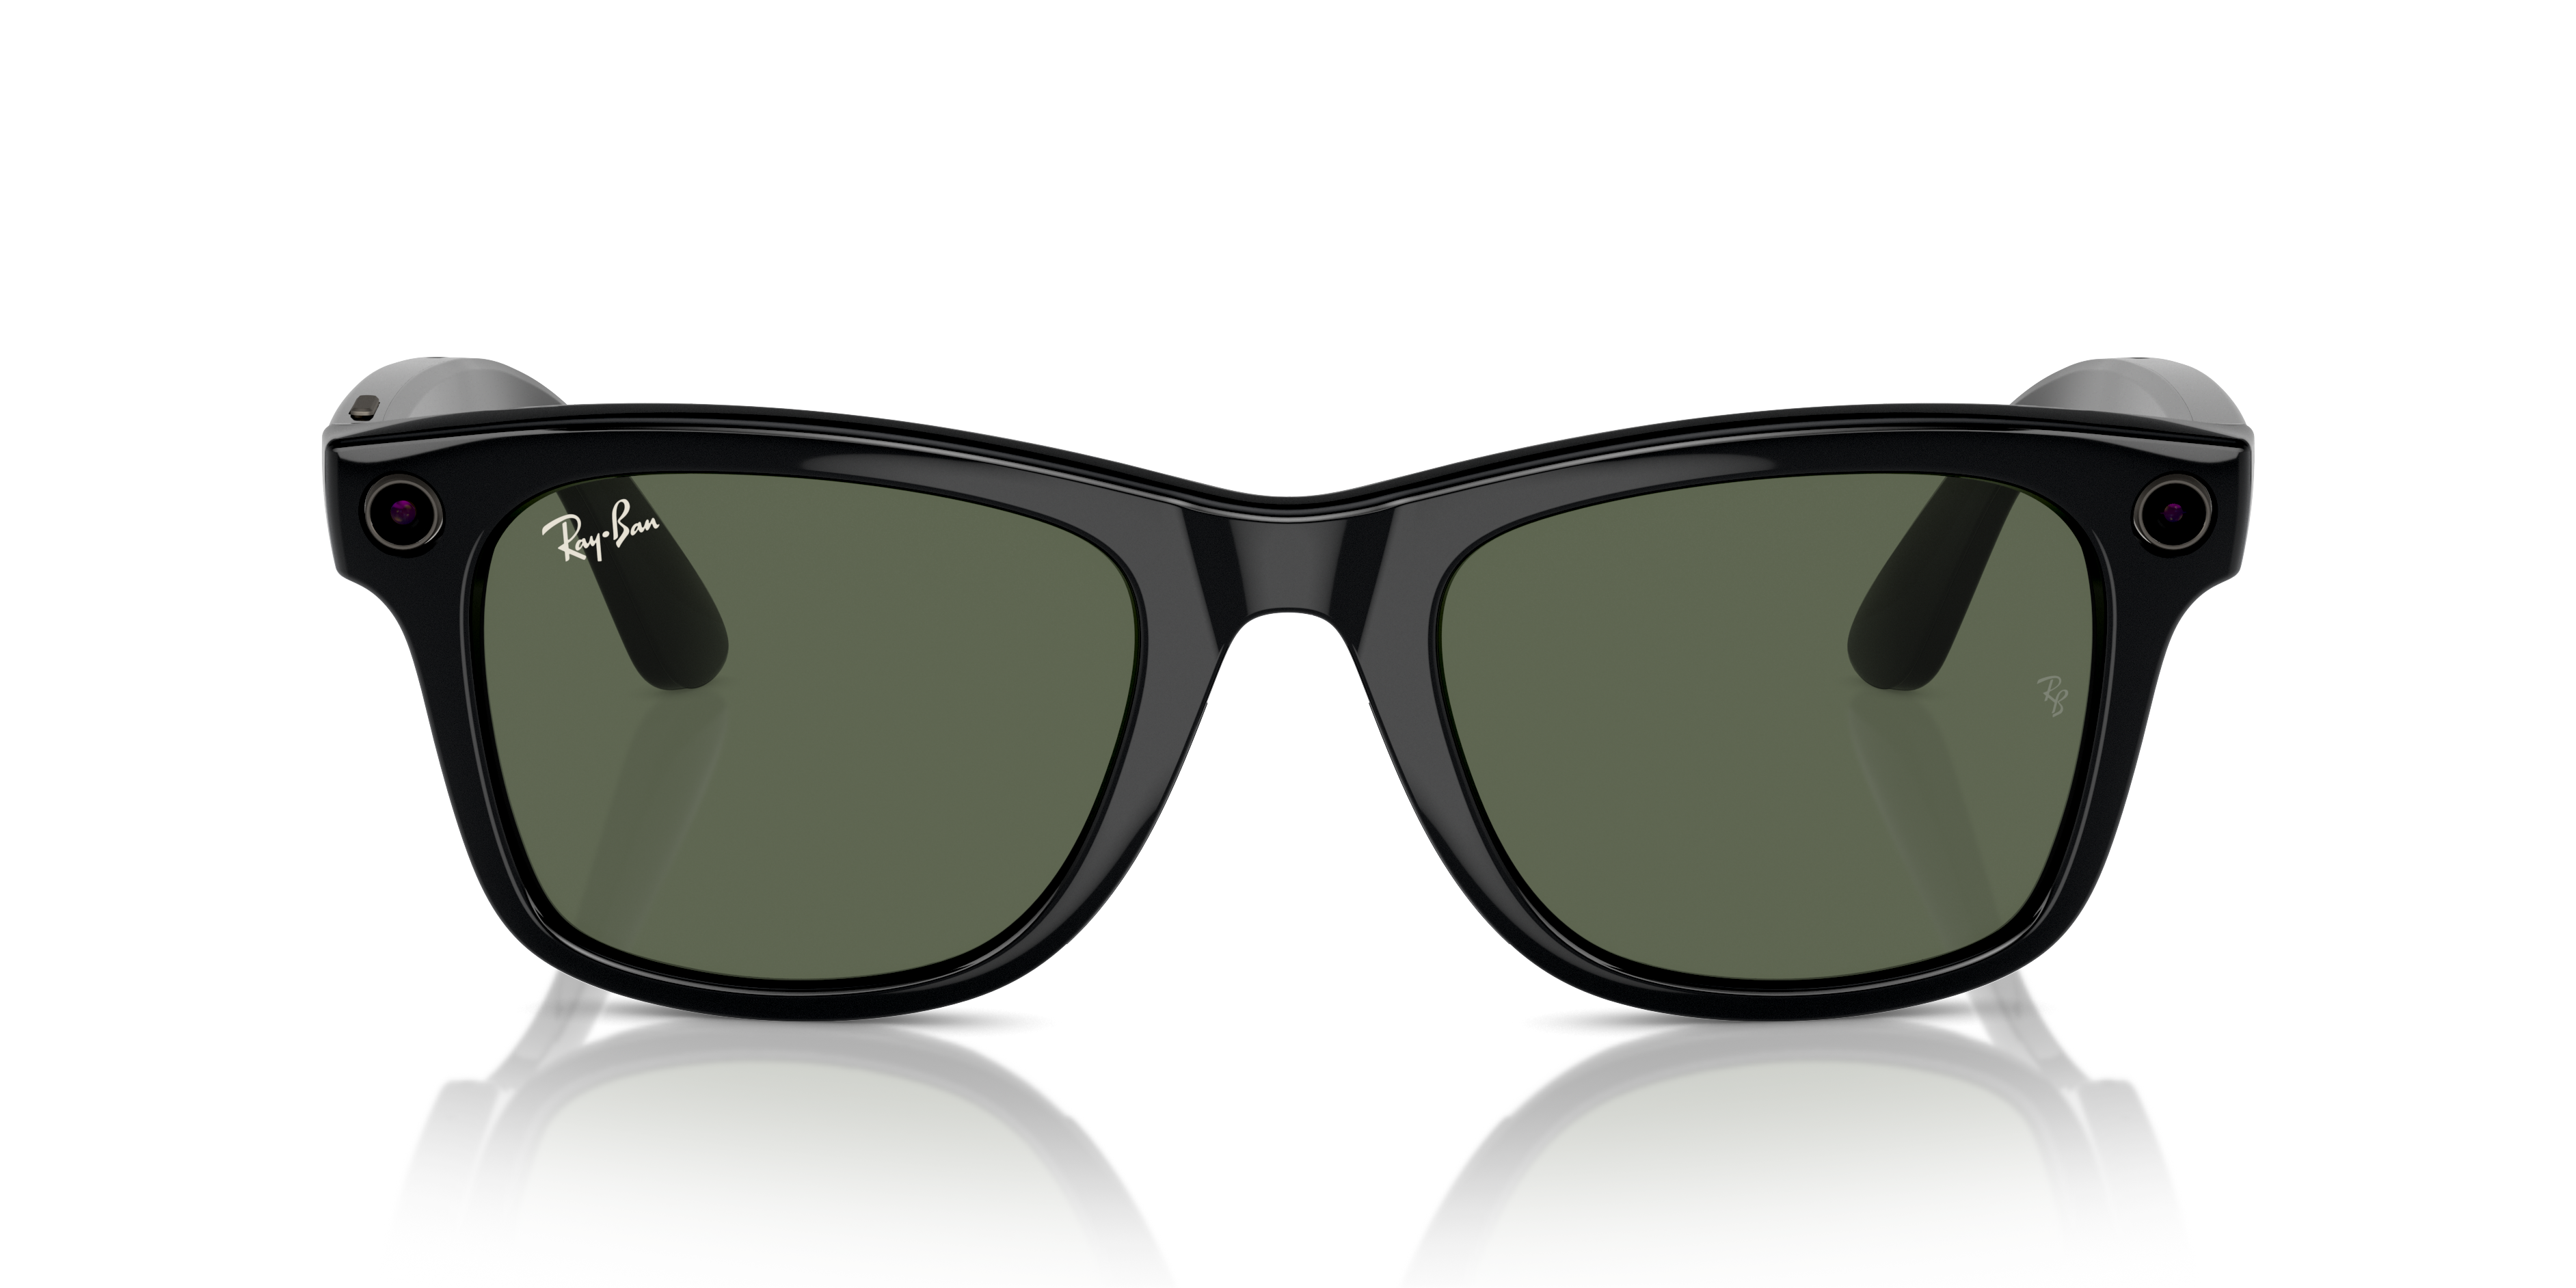 Ray-Ban Clubmaster Classic Sunglasses | Urban Outfitters Singapore Official  Site